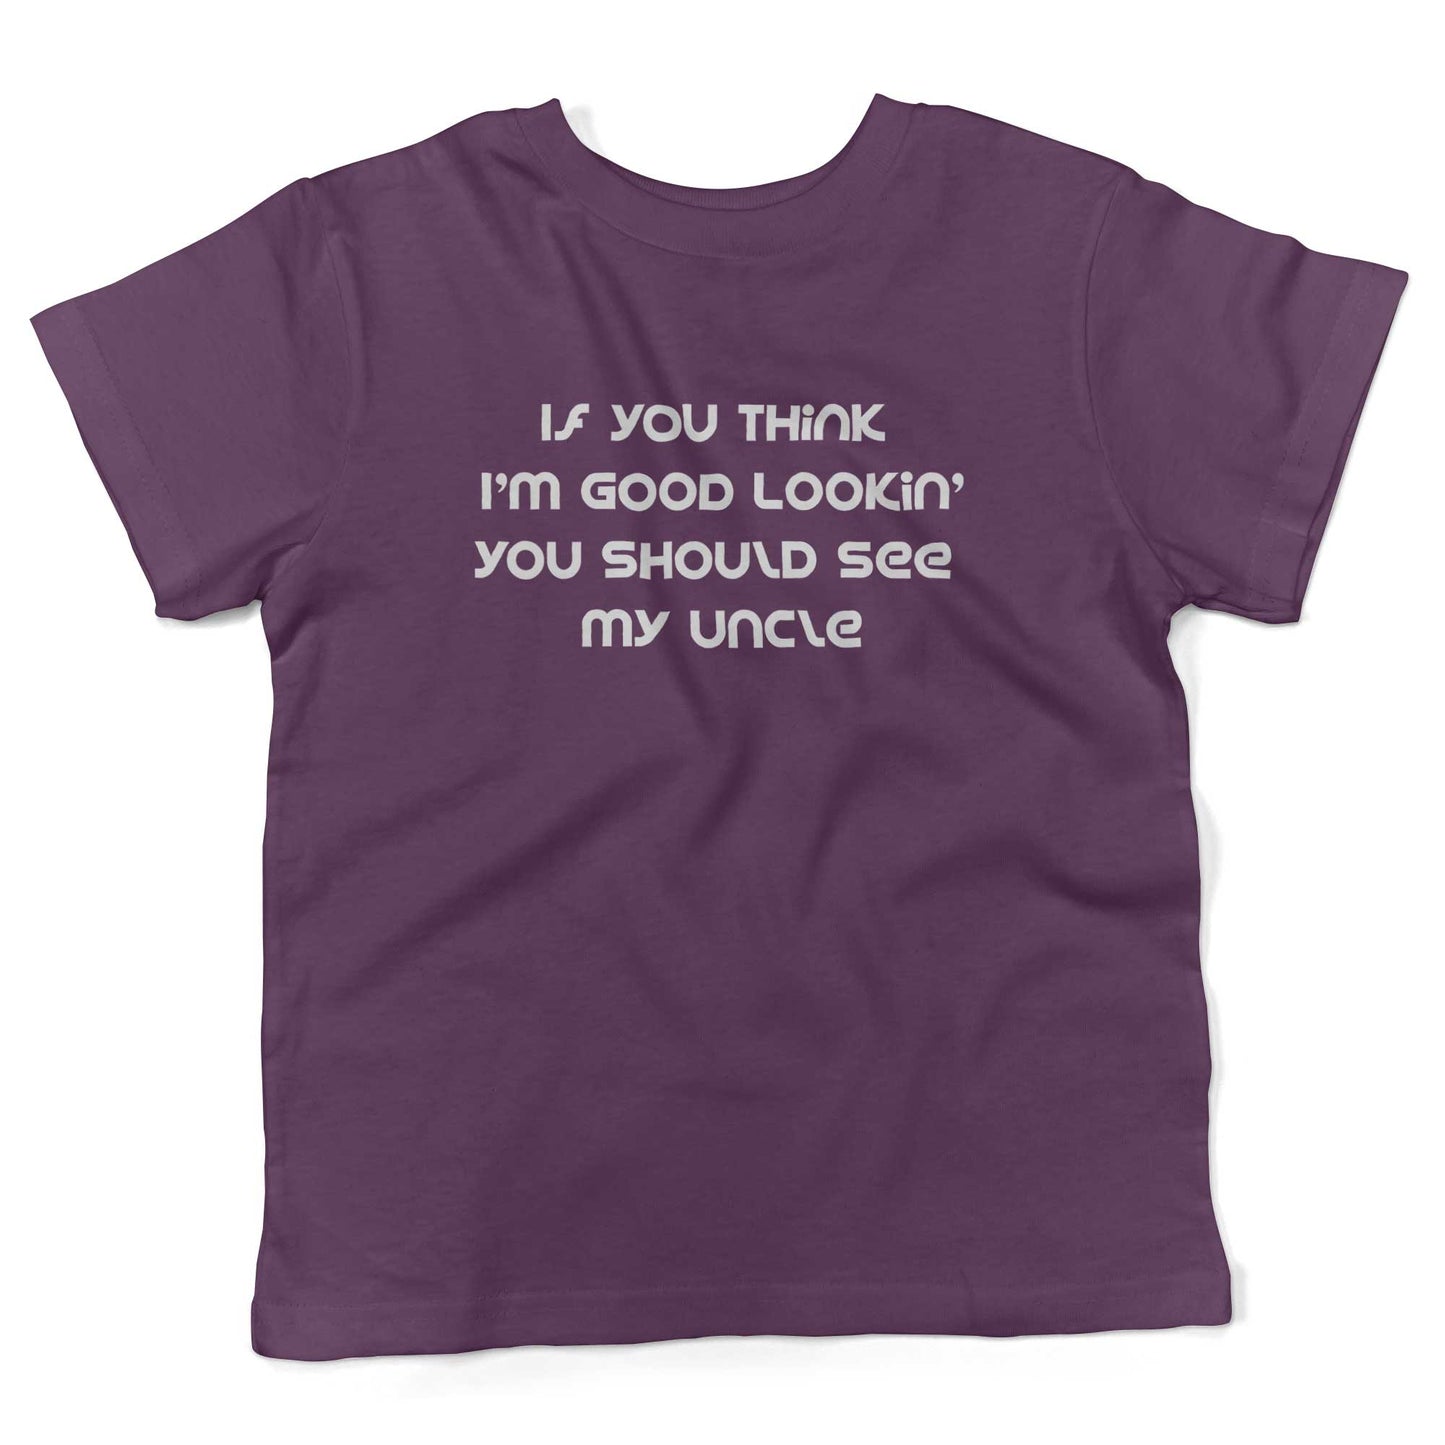 If You Think I'm Good Lookin' You Should See My Uncle Toddler Shirt-Organic Purple-2T